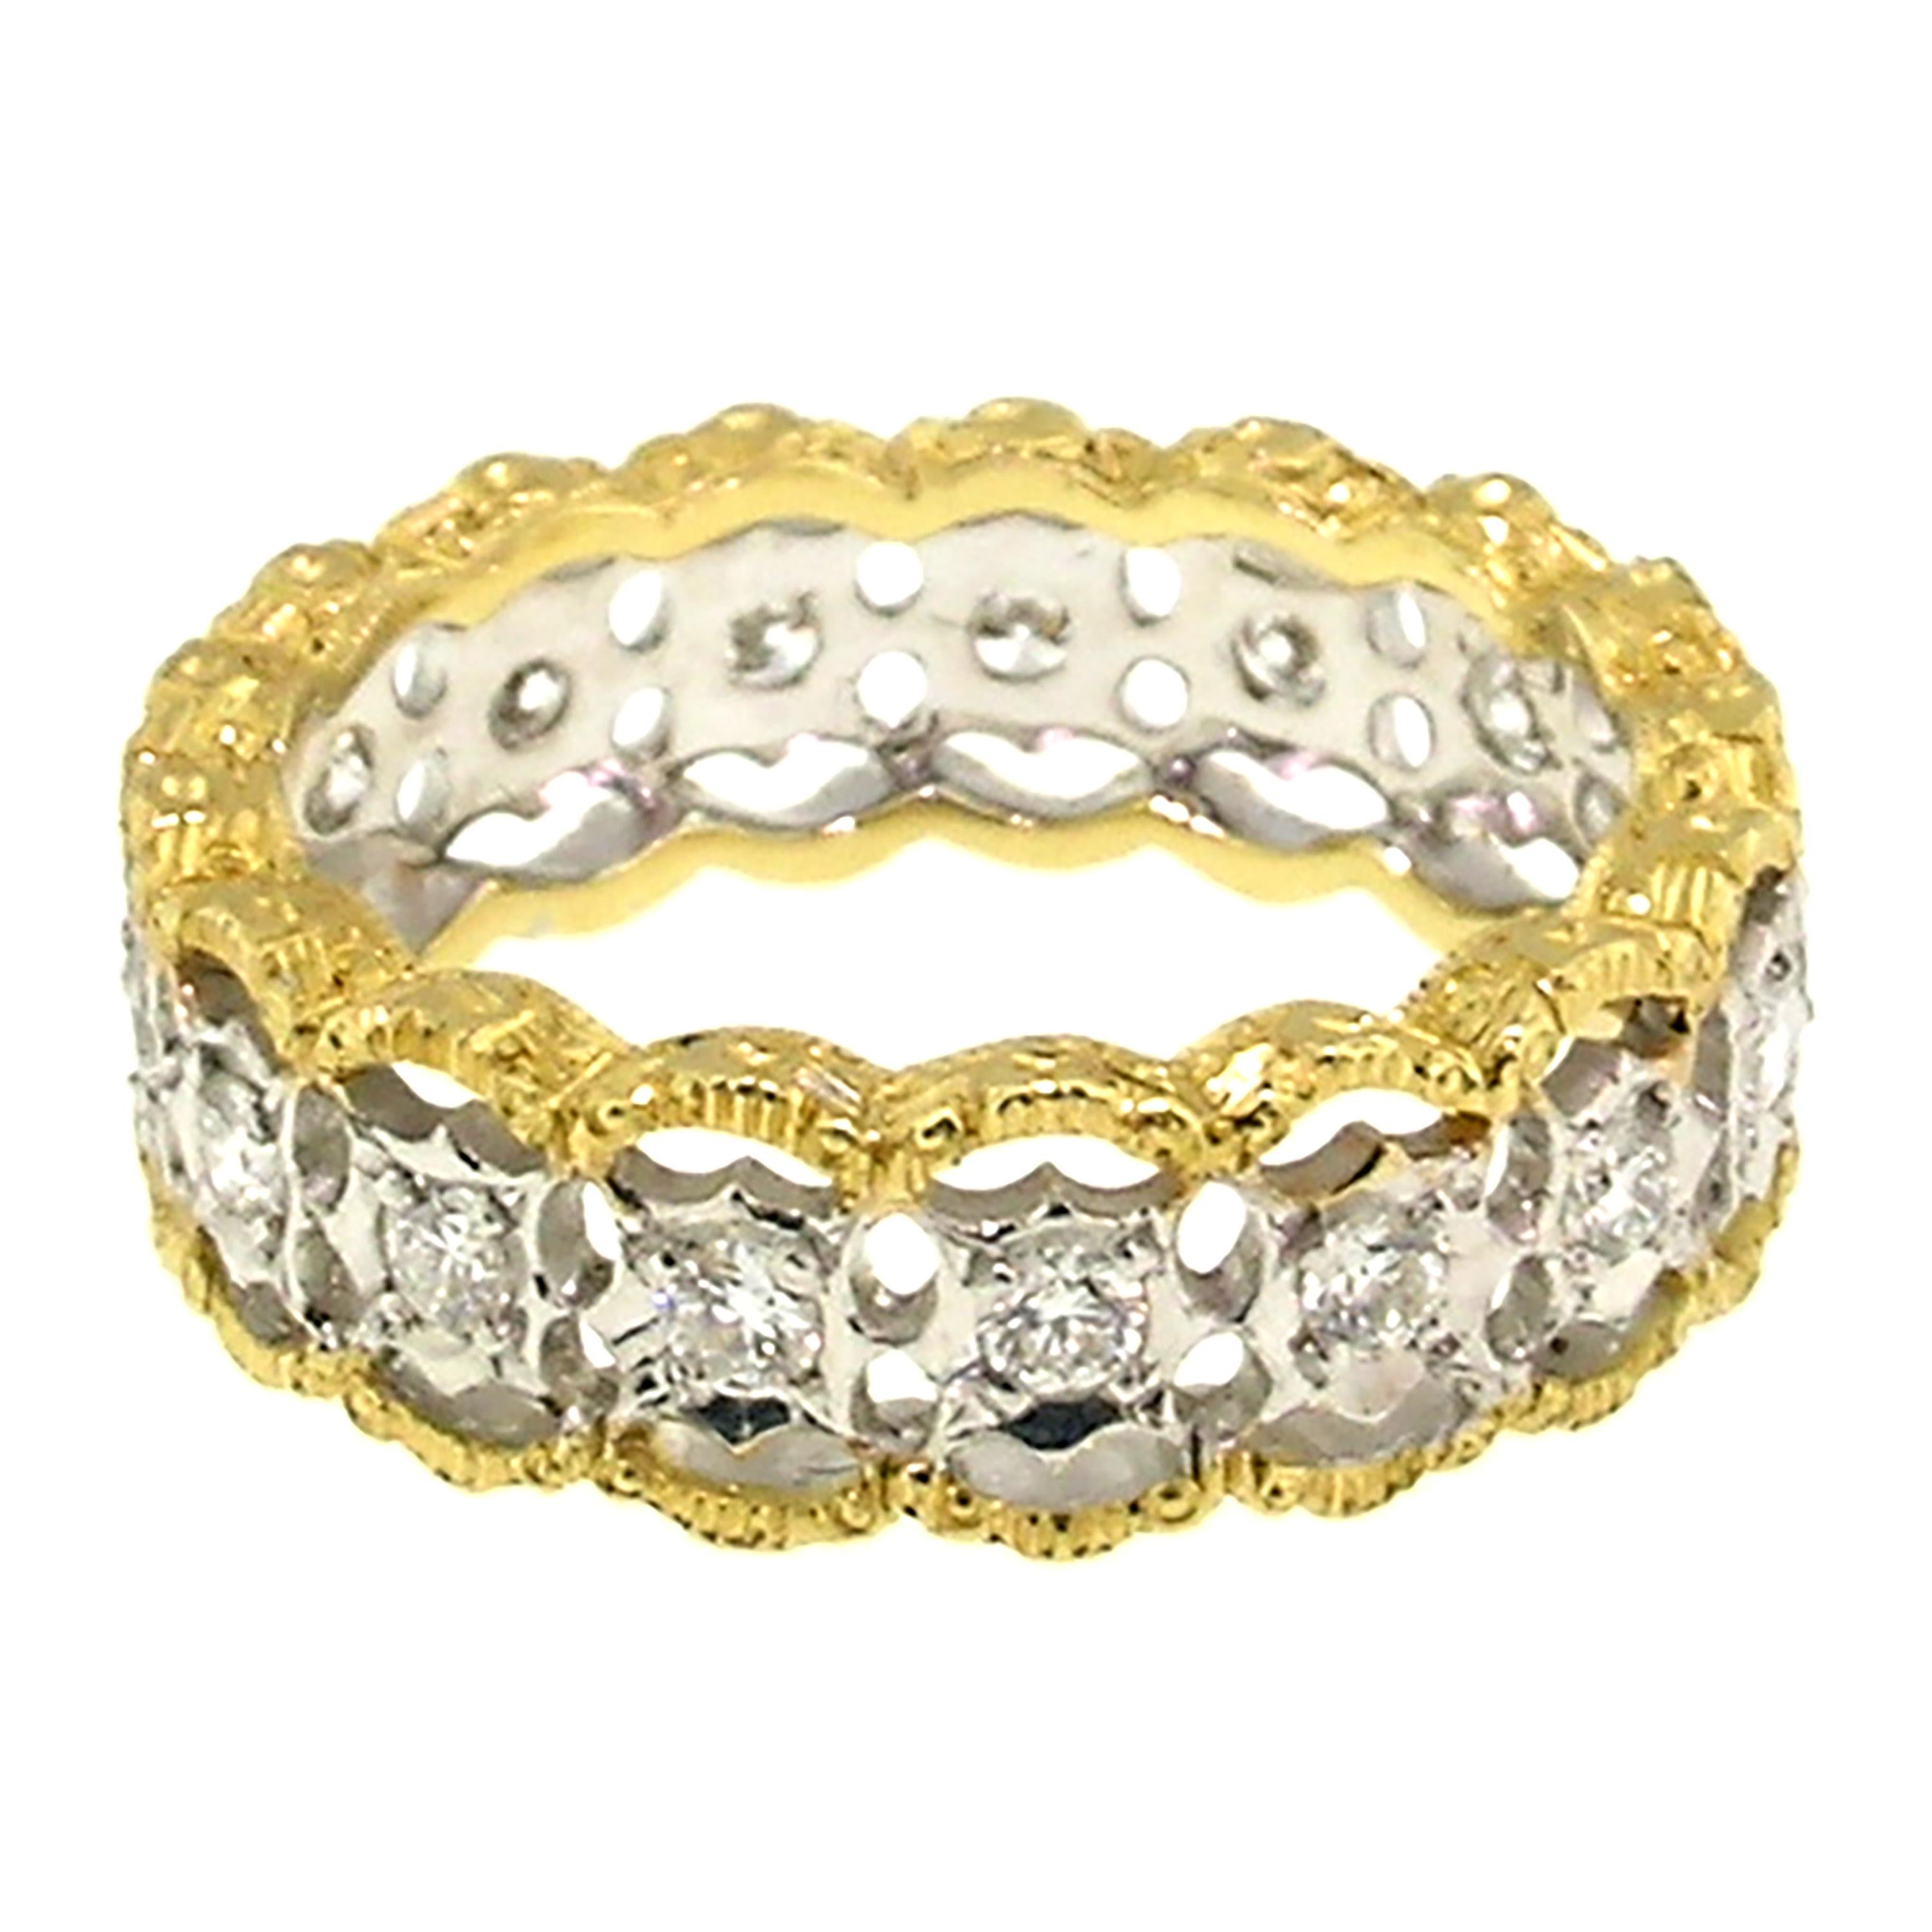 18kt and 0.90ct Diamond Eternity Band, Handmade in Florence, Italy In New Condition For Sale In Logan, UT